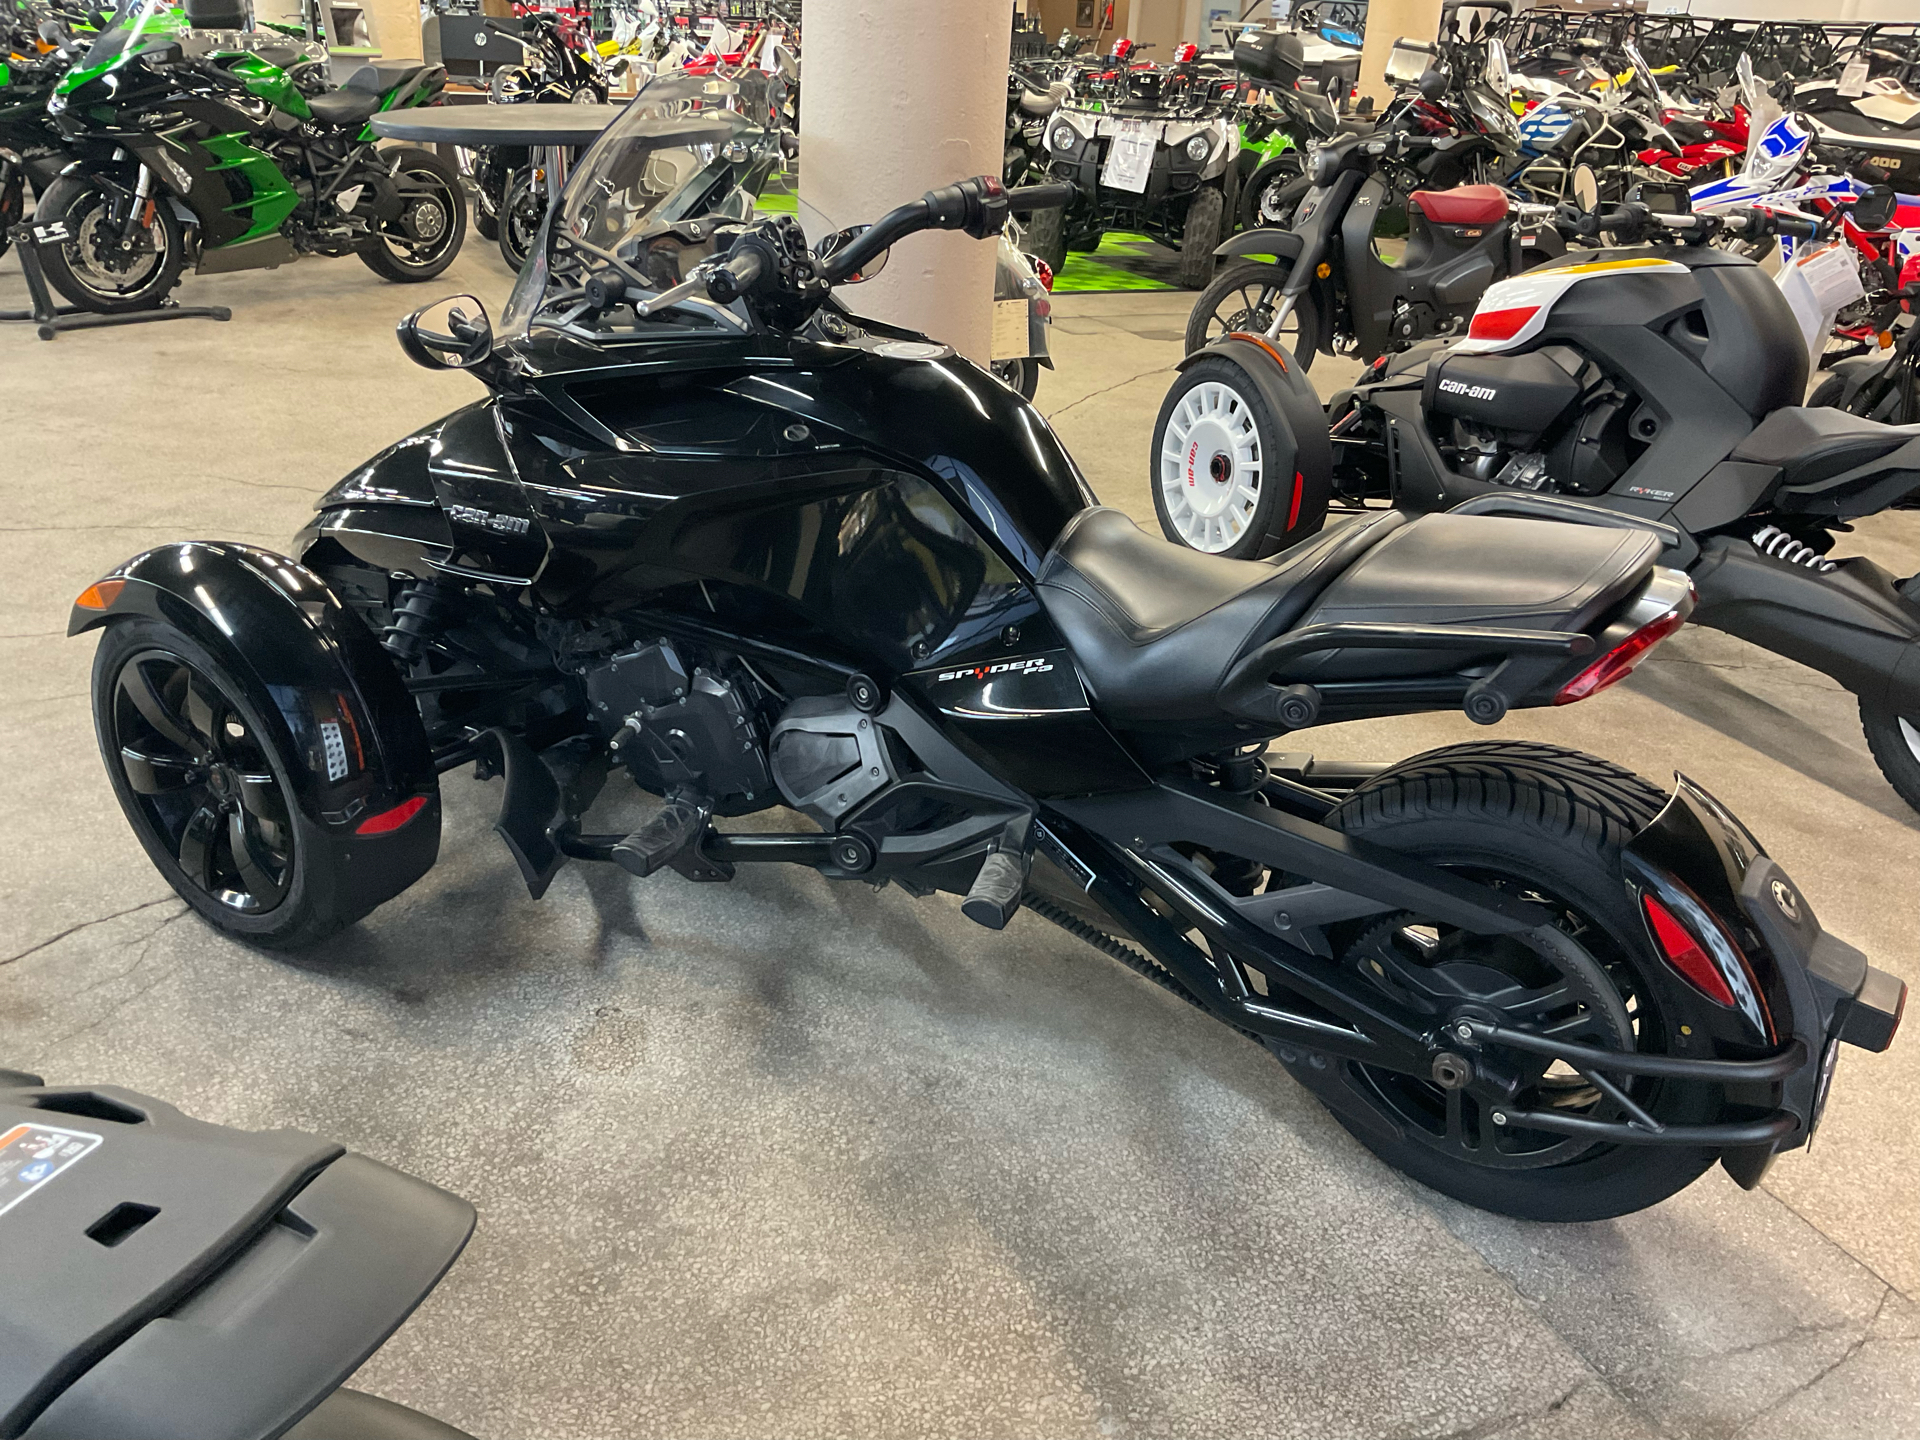 2017 Can-Am Spyder F3 SM6 in Bakersfield, California - Photo 2